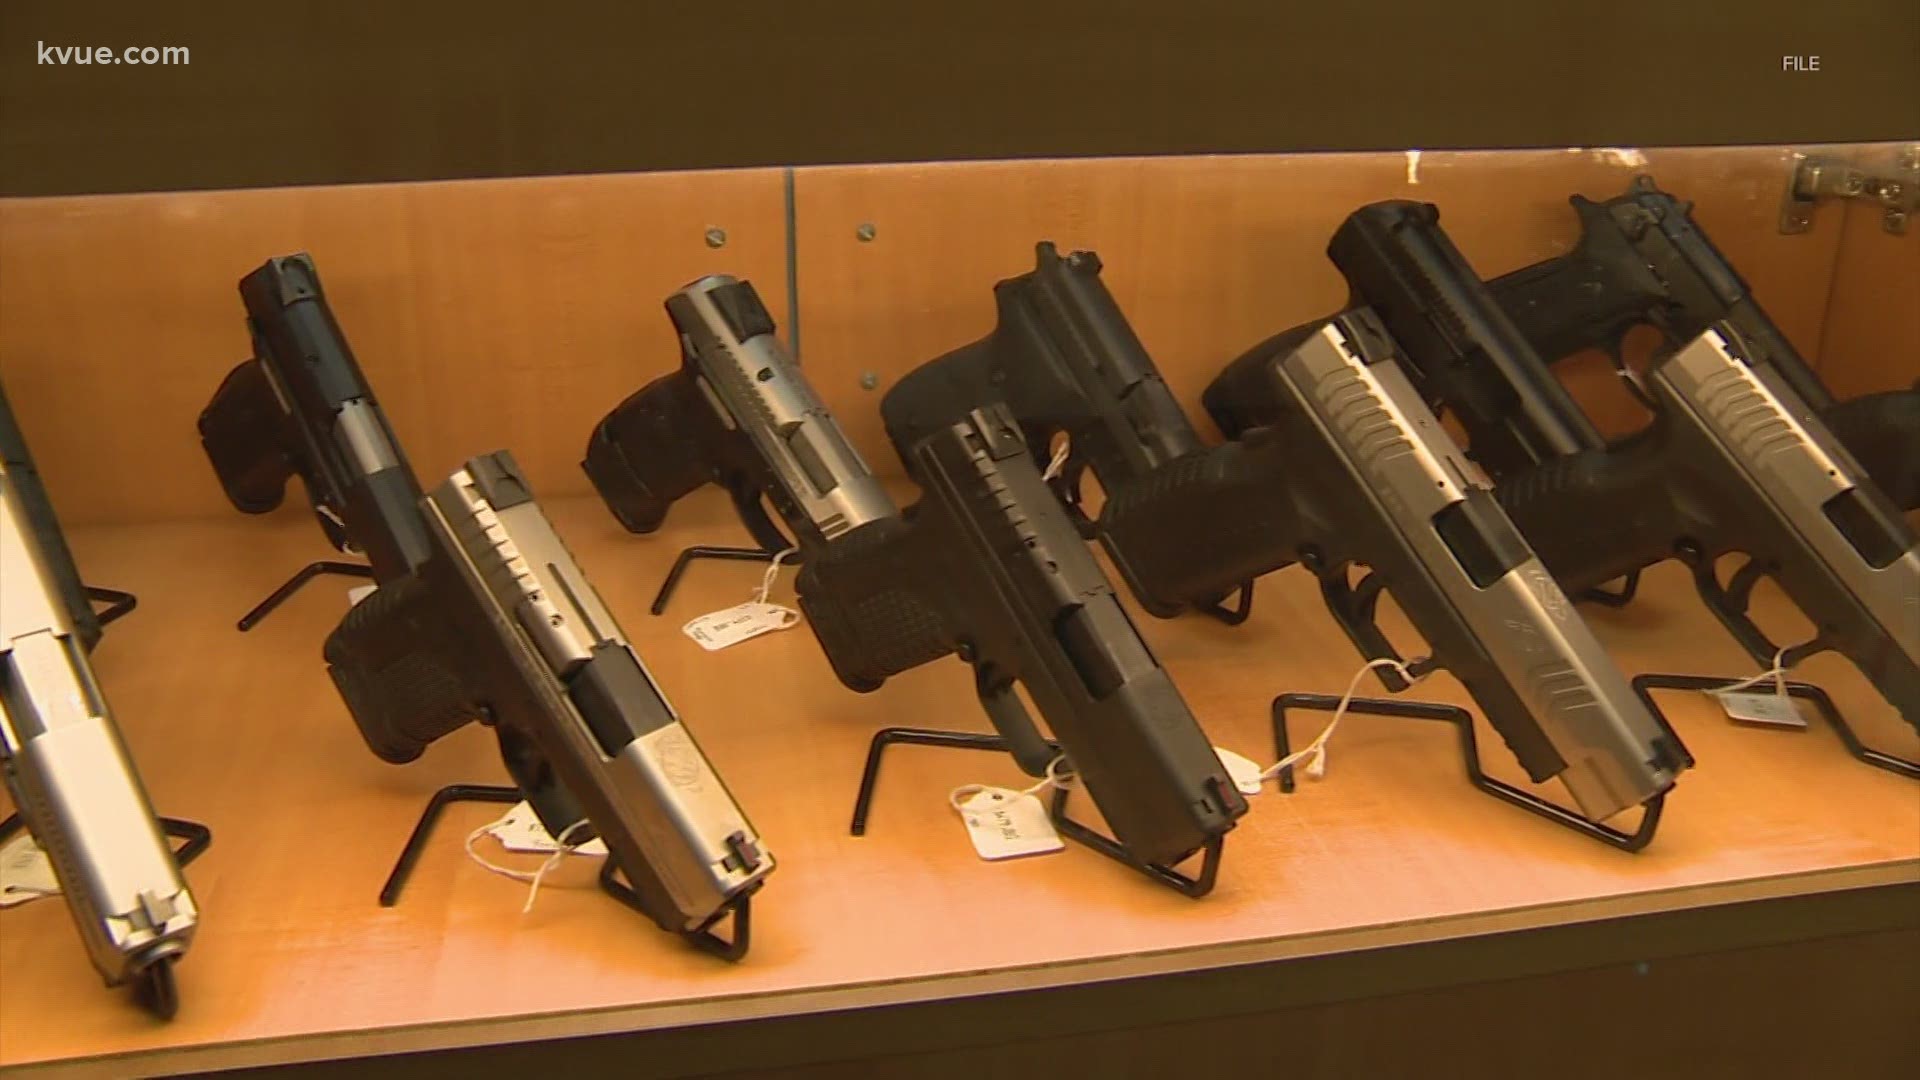 The Texas House has given HB 1927, a permitless carry bill, final approval. It now heads to the Senate.